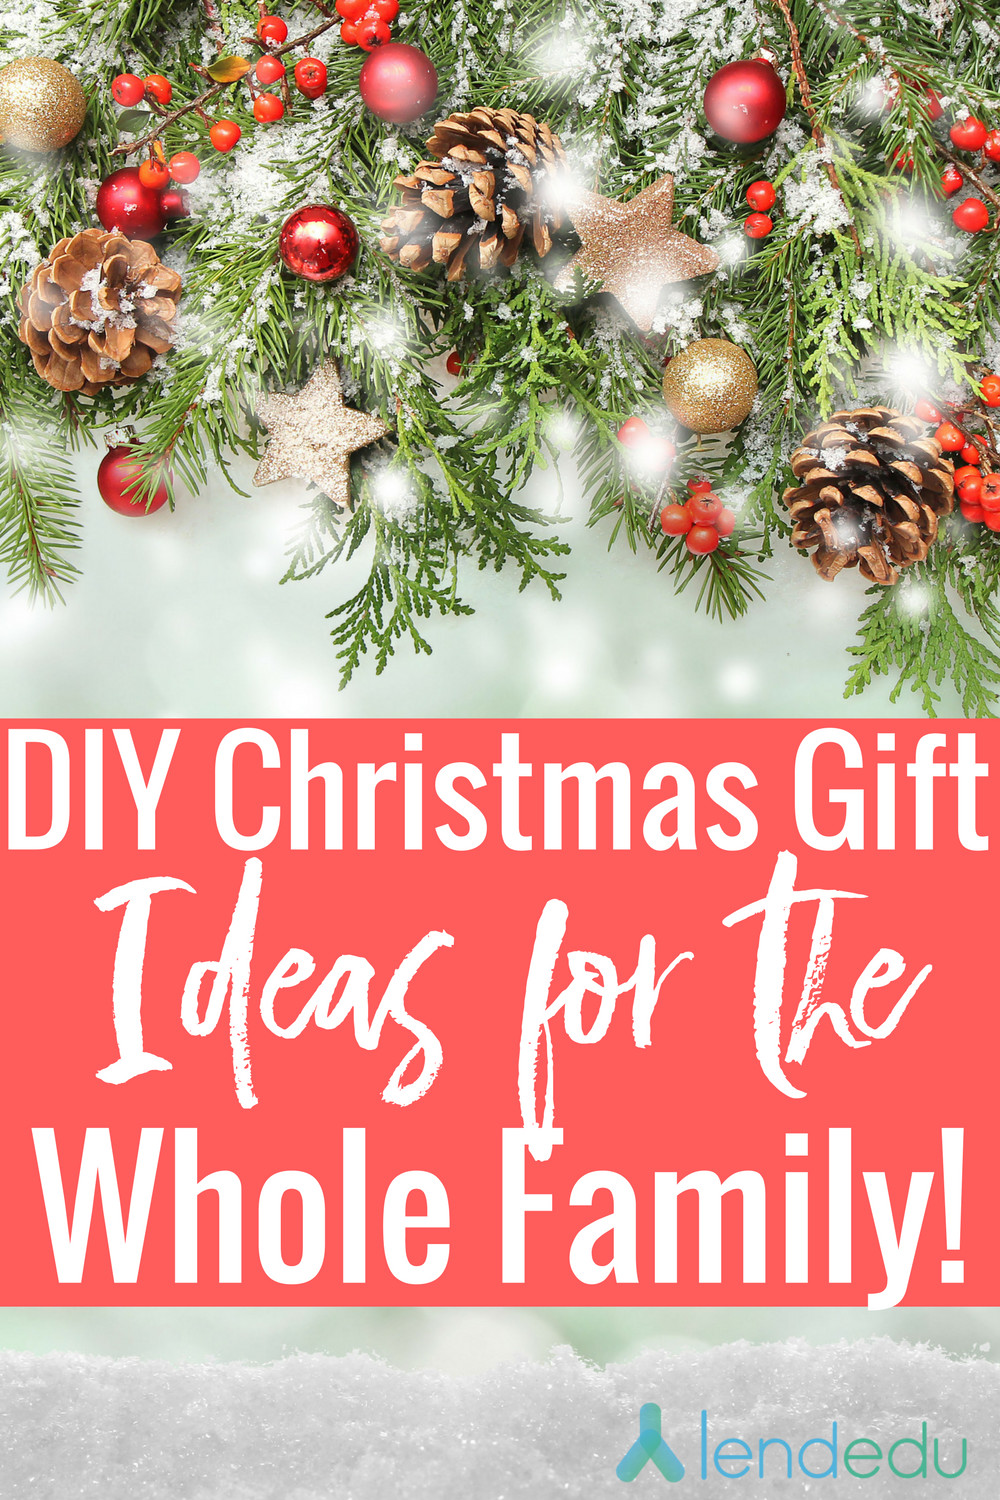 Christmas Gift Ideas For Family
 DIY Christmas Gifts for the Whole Family LendEDU